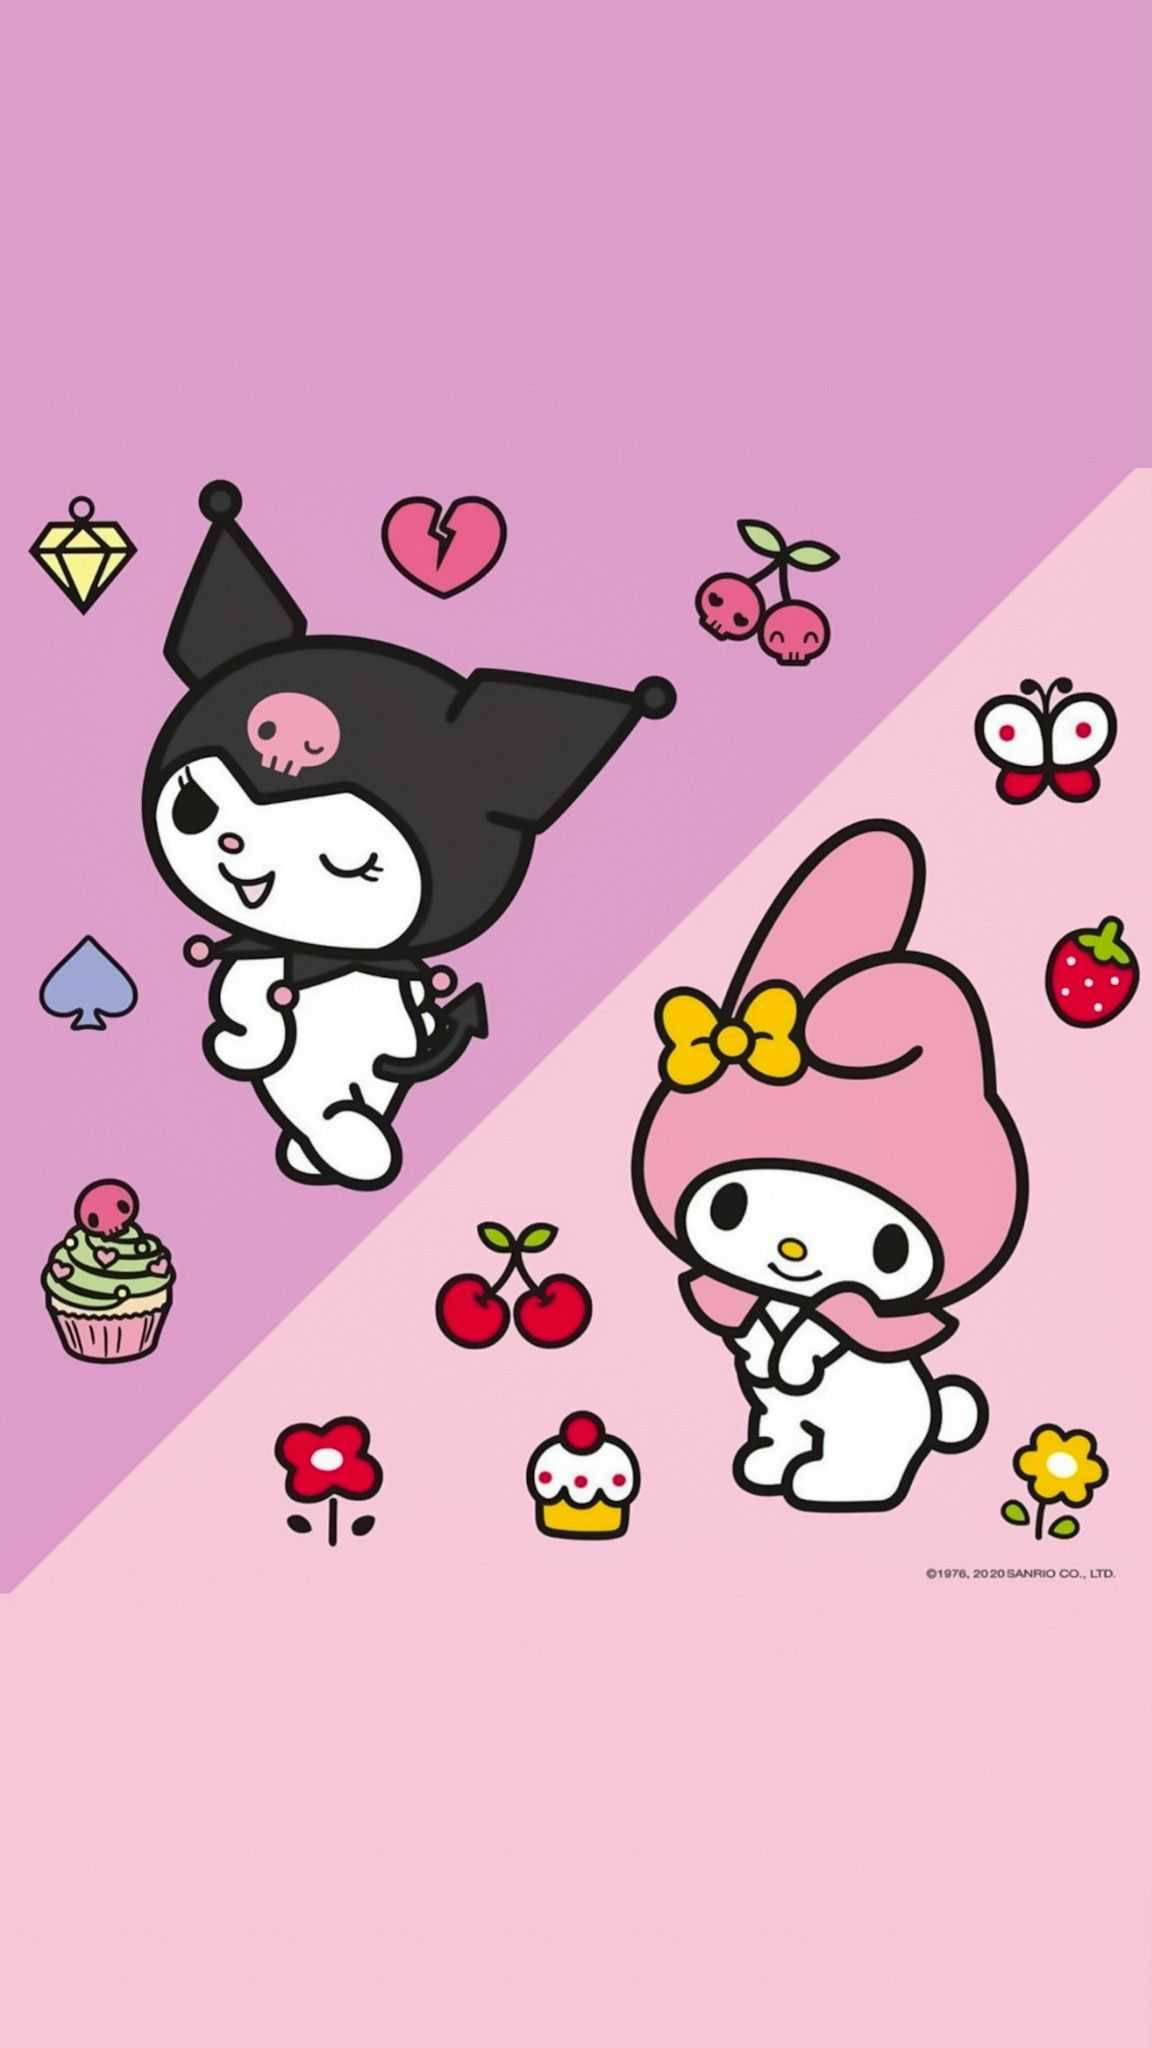 Download Kuromi And Melody The Sanrio Duo Wallpaper | Wallpapers.com